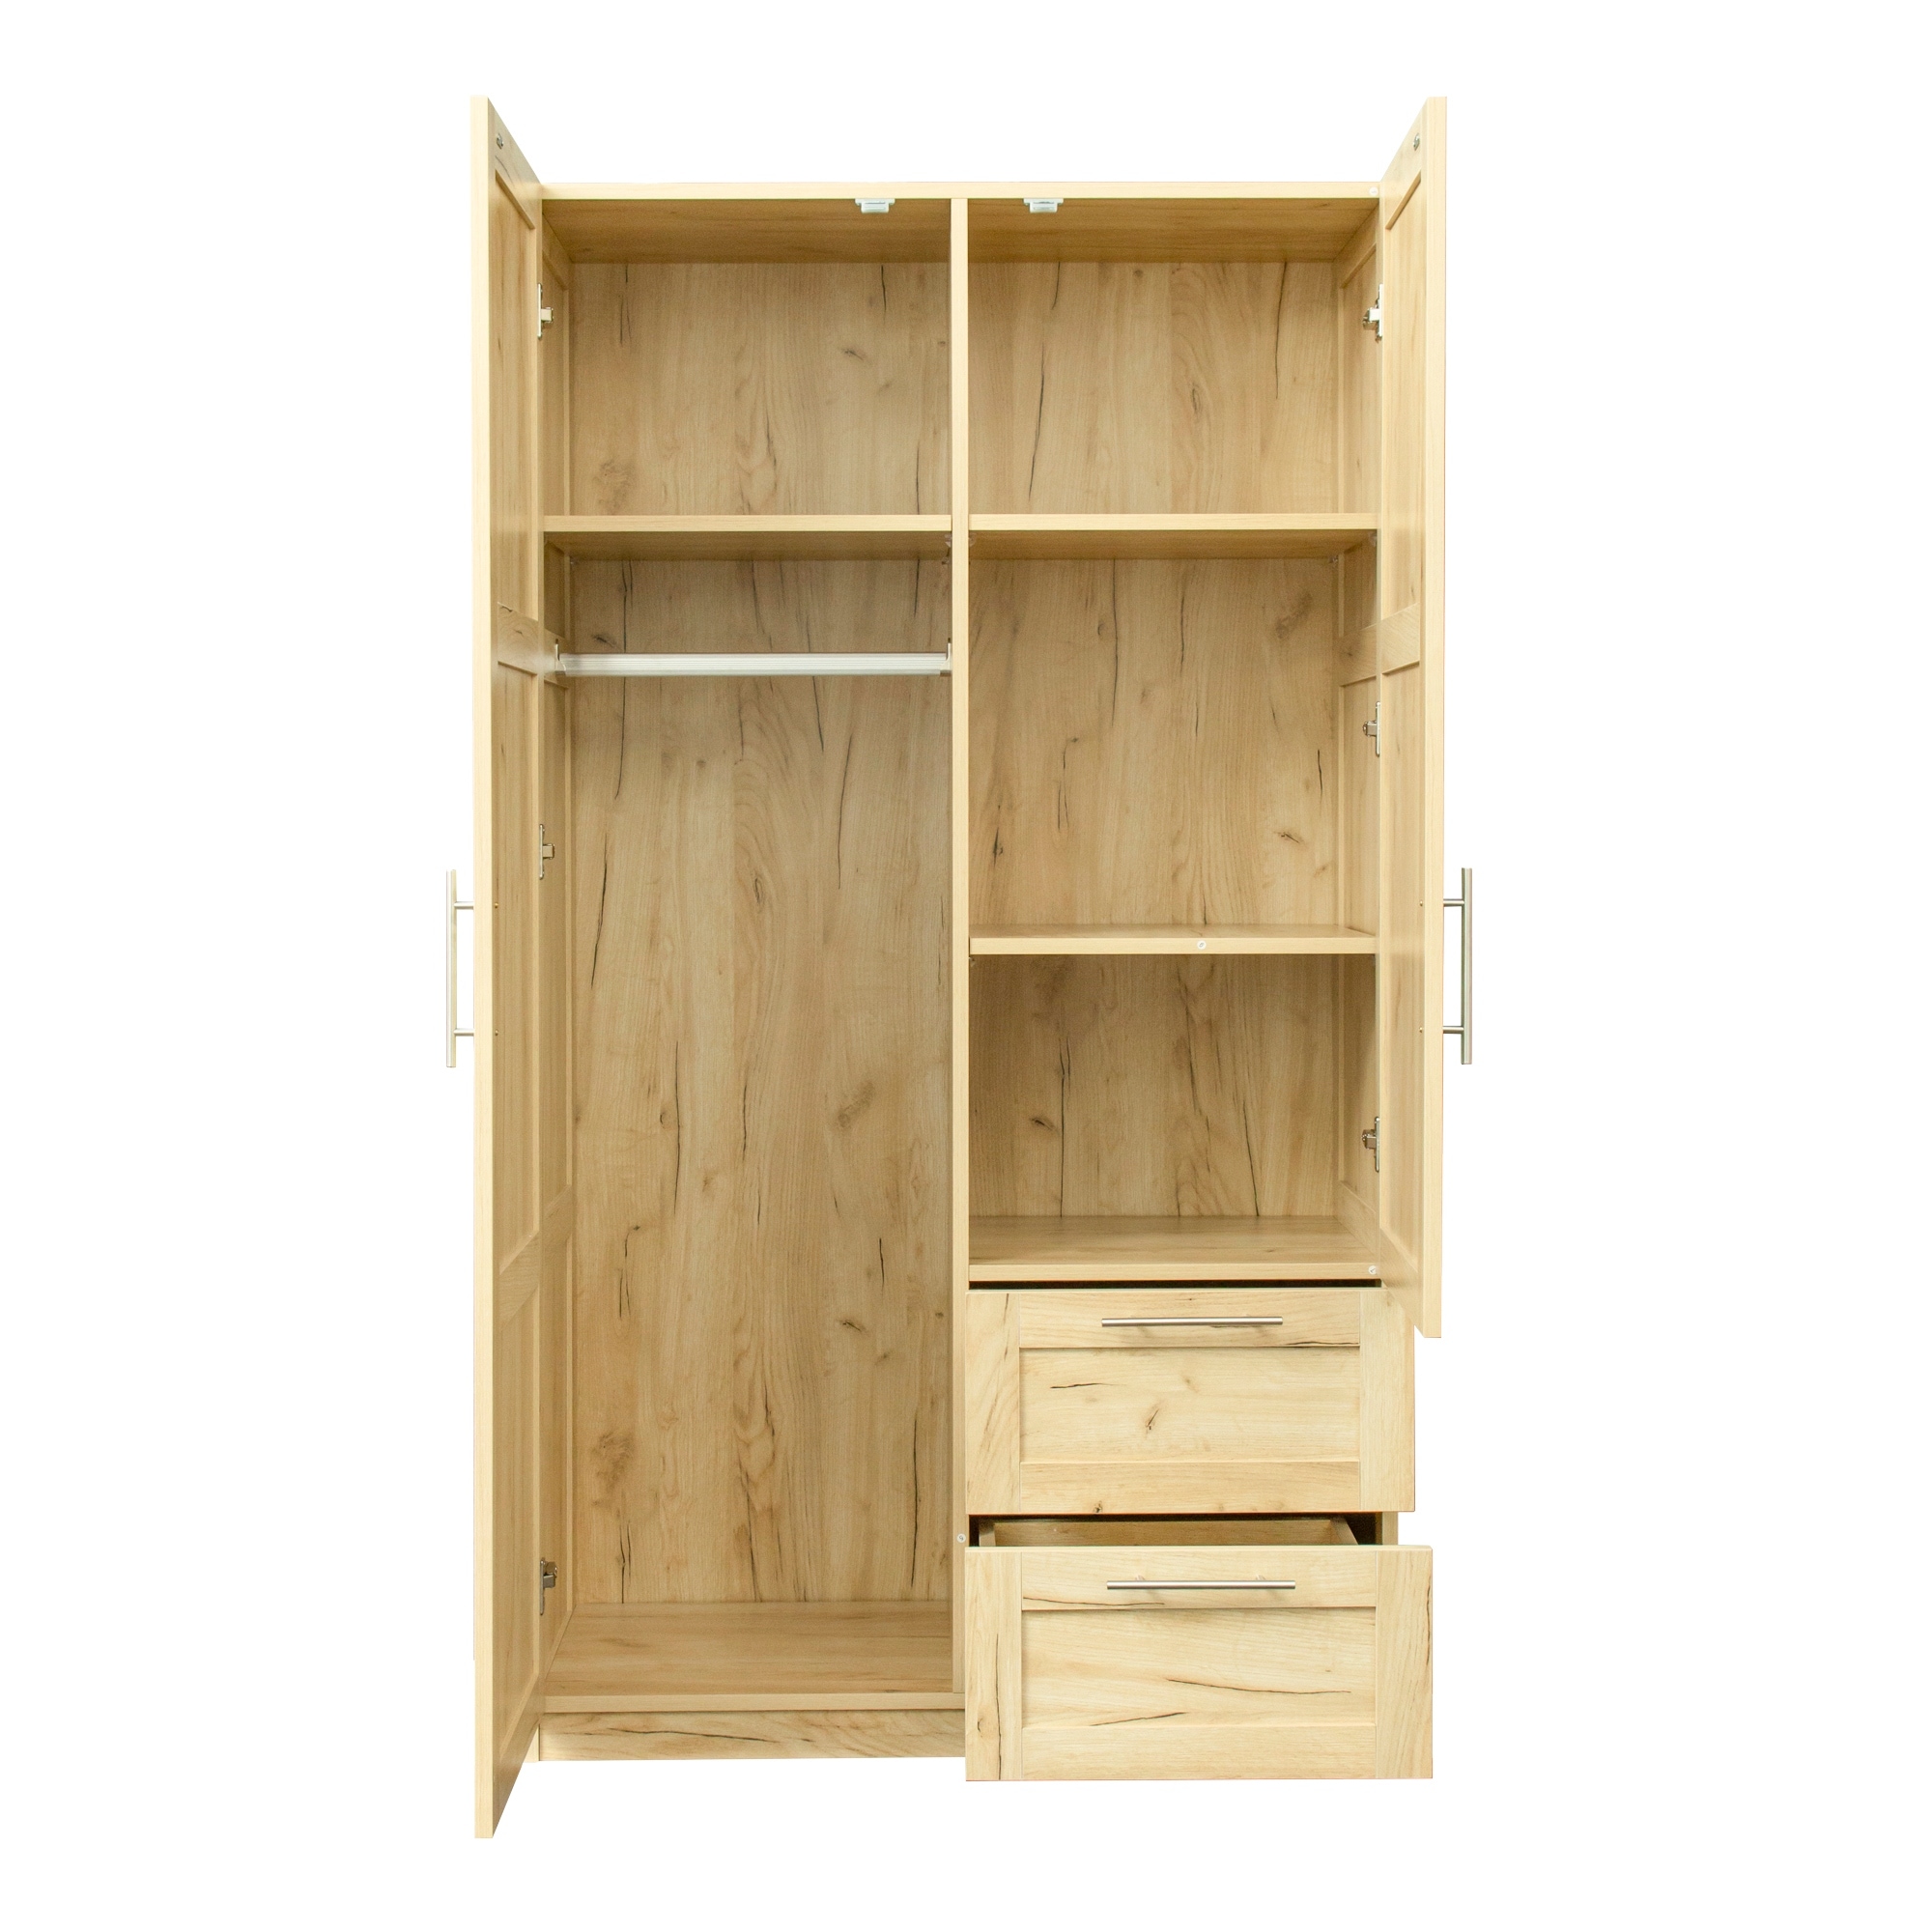 https://ak1.ostkcdn.com/images/products/is/images/direct/21e116d93db358c7300cd6e648300da1b05a4855/Tall-wardrobe-and-kitchen-cabinet-with-2-drawers-and-5-storage-spaces.jpg